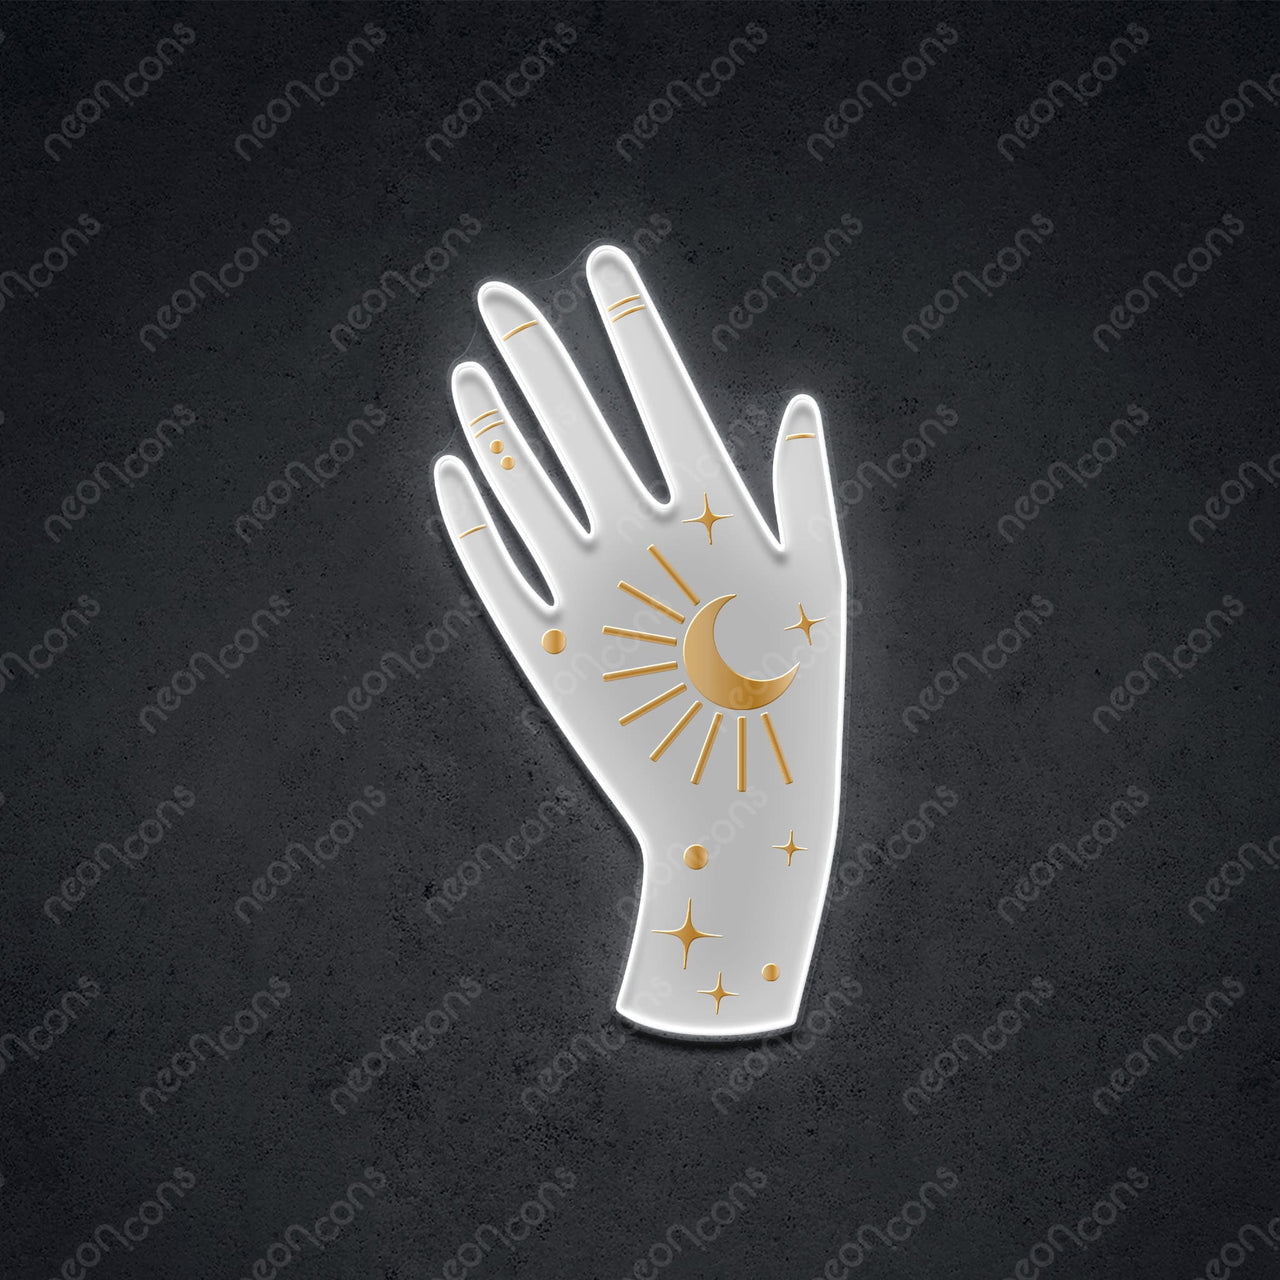 "Palm Reader" LED Neon x Print x Reflective Acrylic by Neon Icons